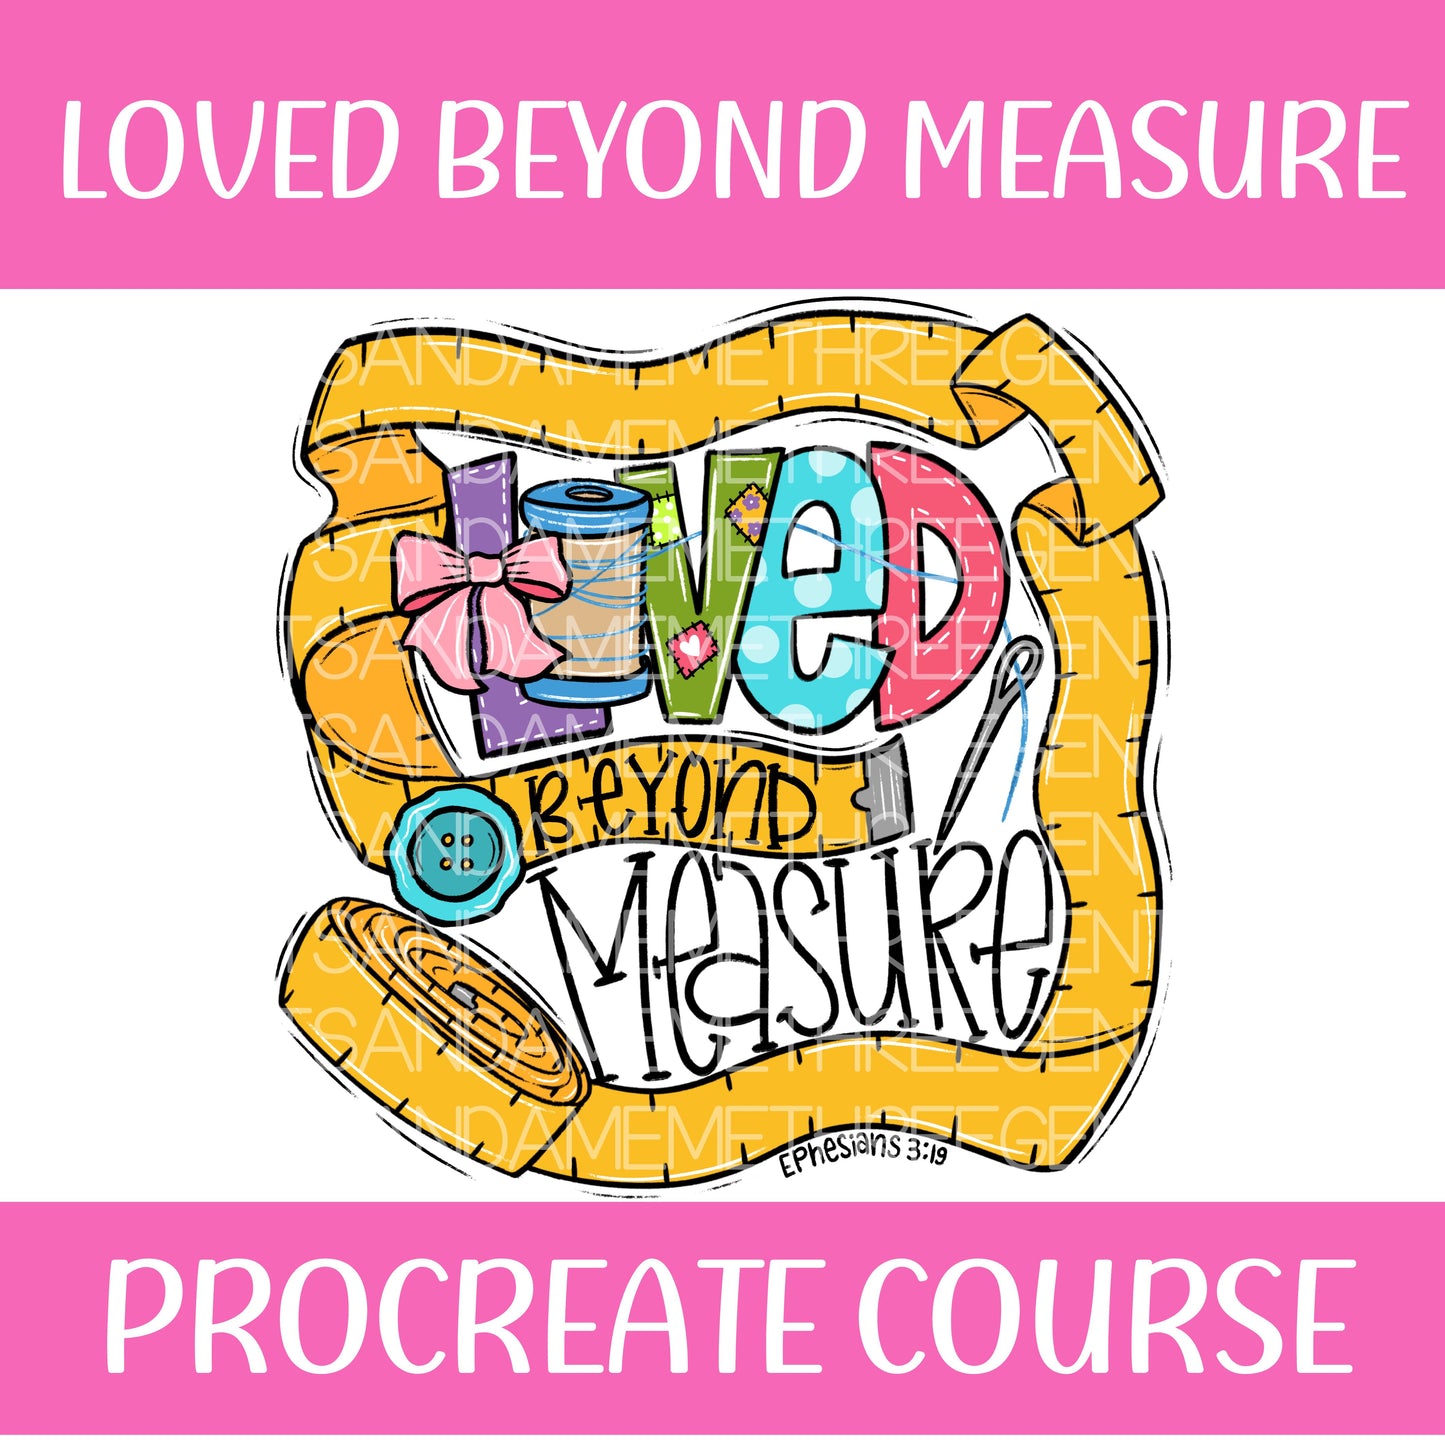 LOVED BEYOND MEASURE PROCREATE COURSE